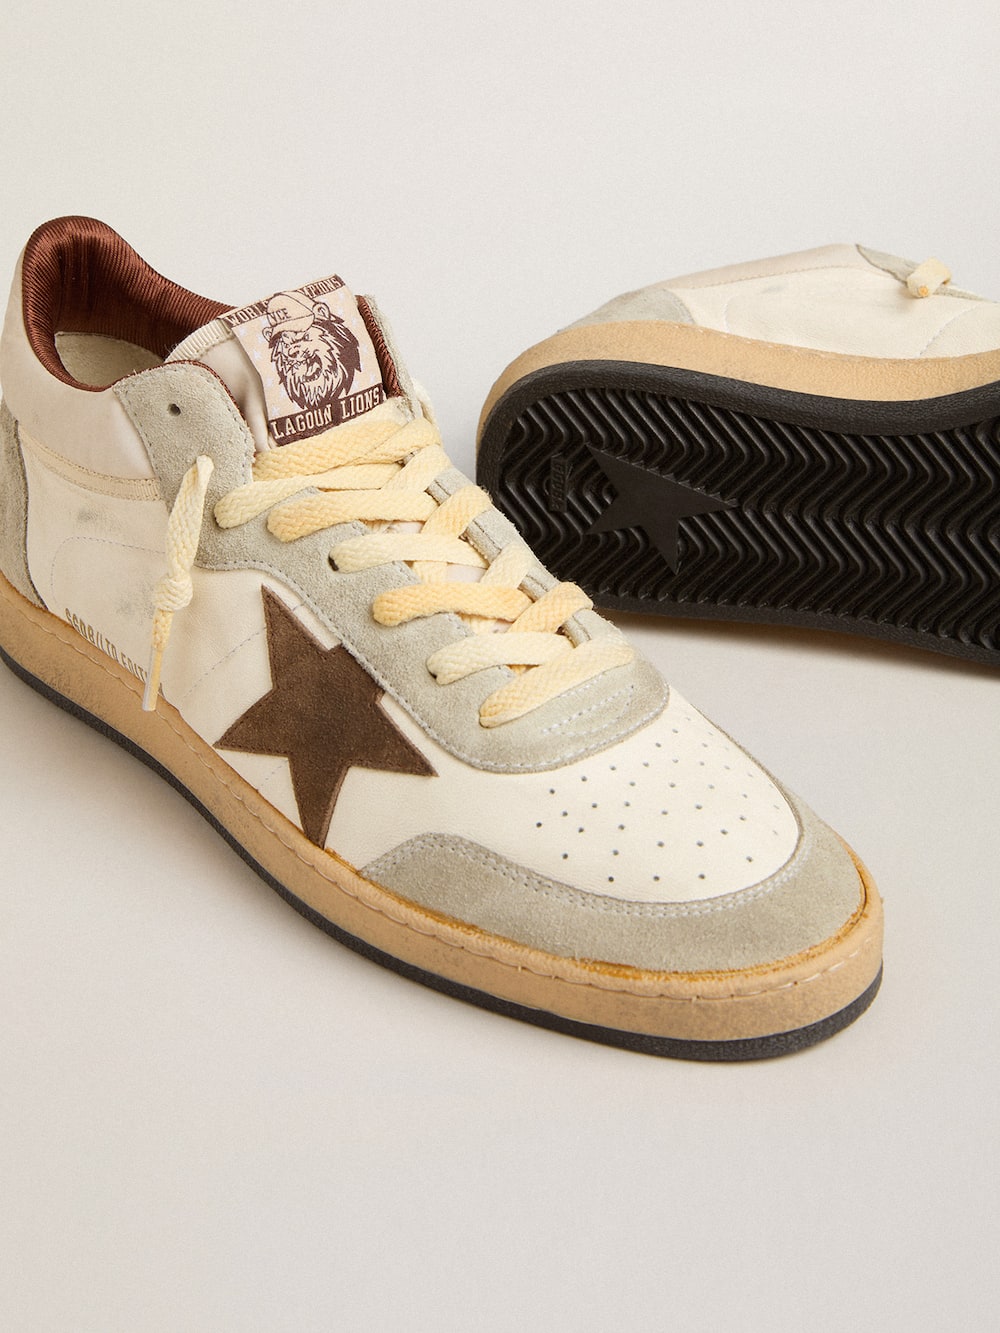 Golden Goose - Ball Star LTD in nappa and nylon with suede star and inserts in 